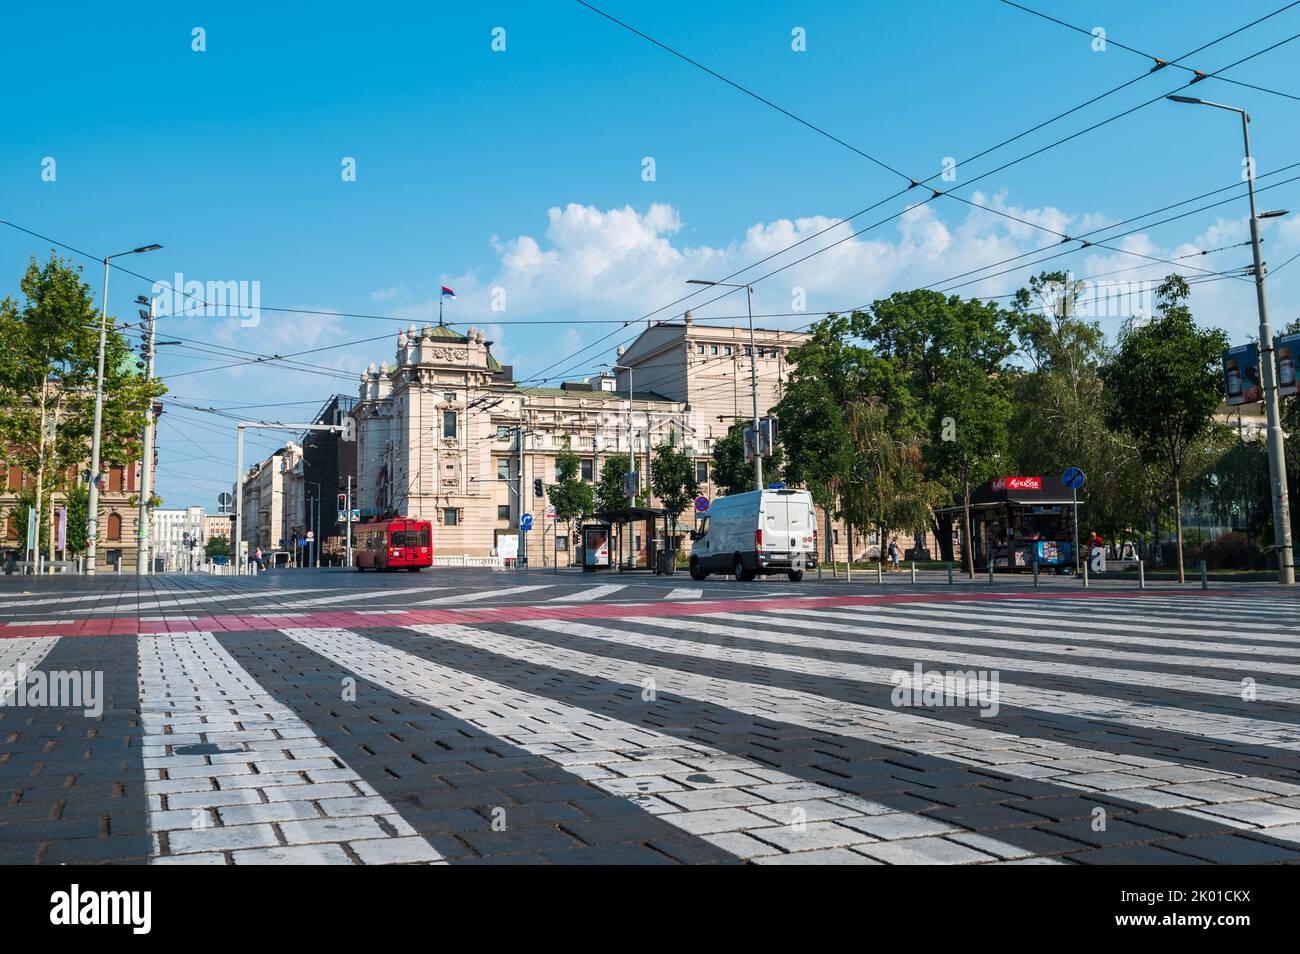 Belgrade, Serbia - July 24, 2022: National theater and Republic square in Belgrade downtown at the capital city of the Republic of Serbia Stock Photo